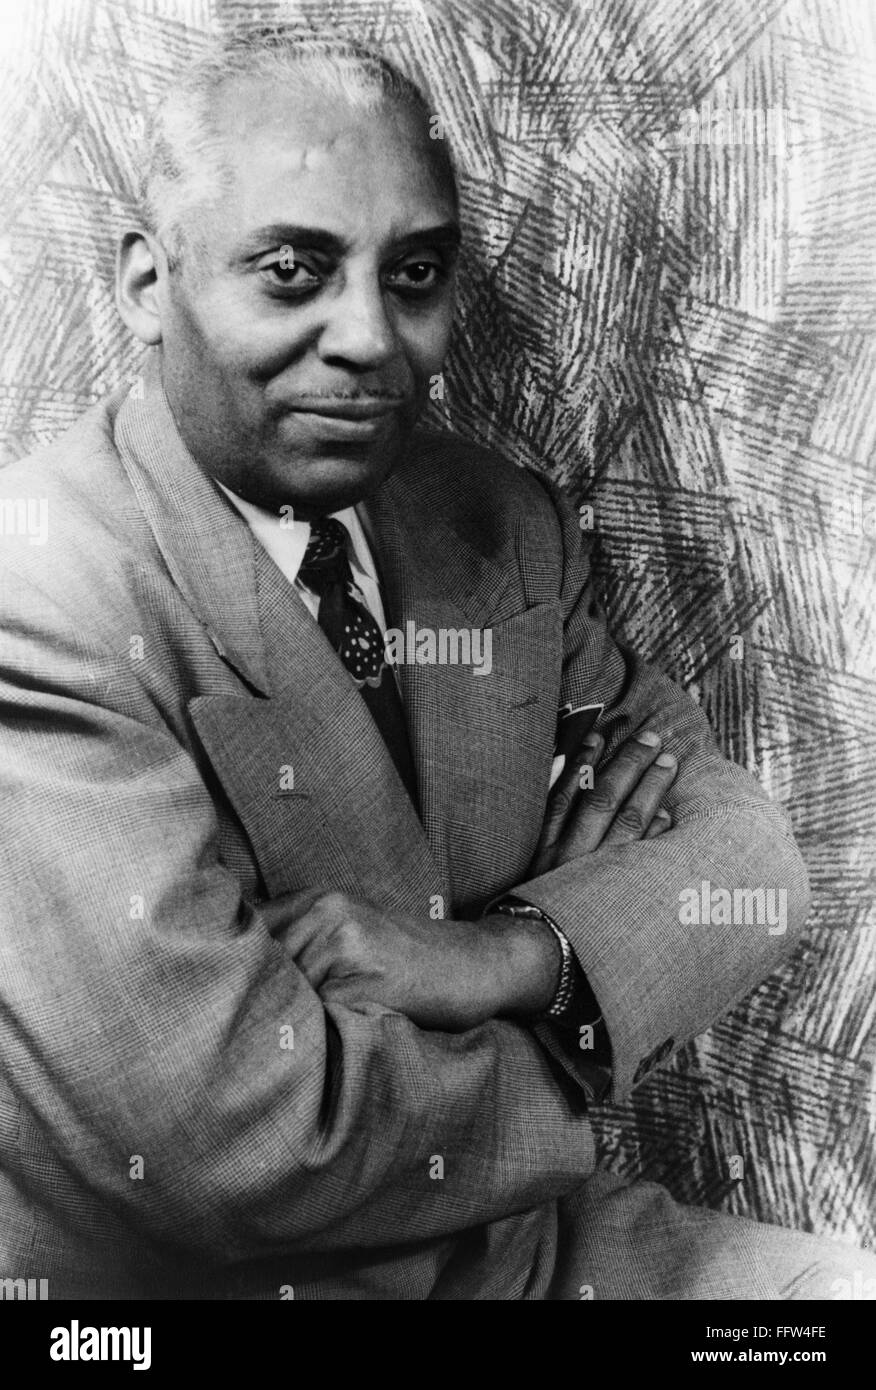 NOBLE SISSLE (1889-1975). /nAmerican jazz composer and bandleader. Photographed by Carl Van Vechten, 1951. Stock Photo